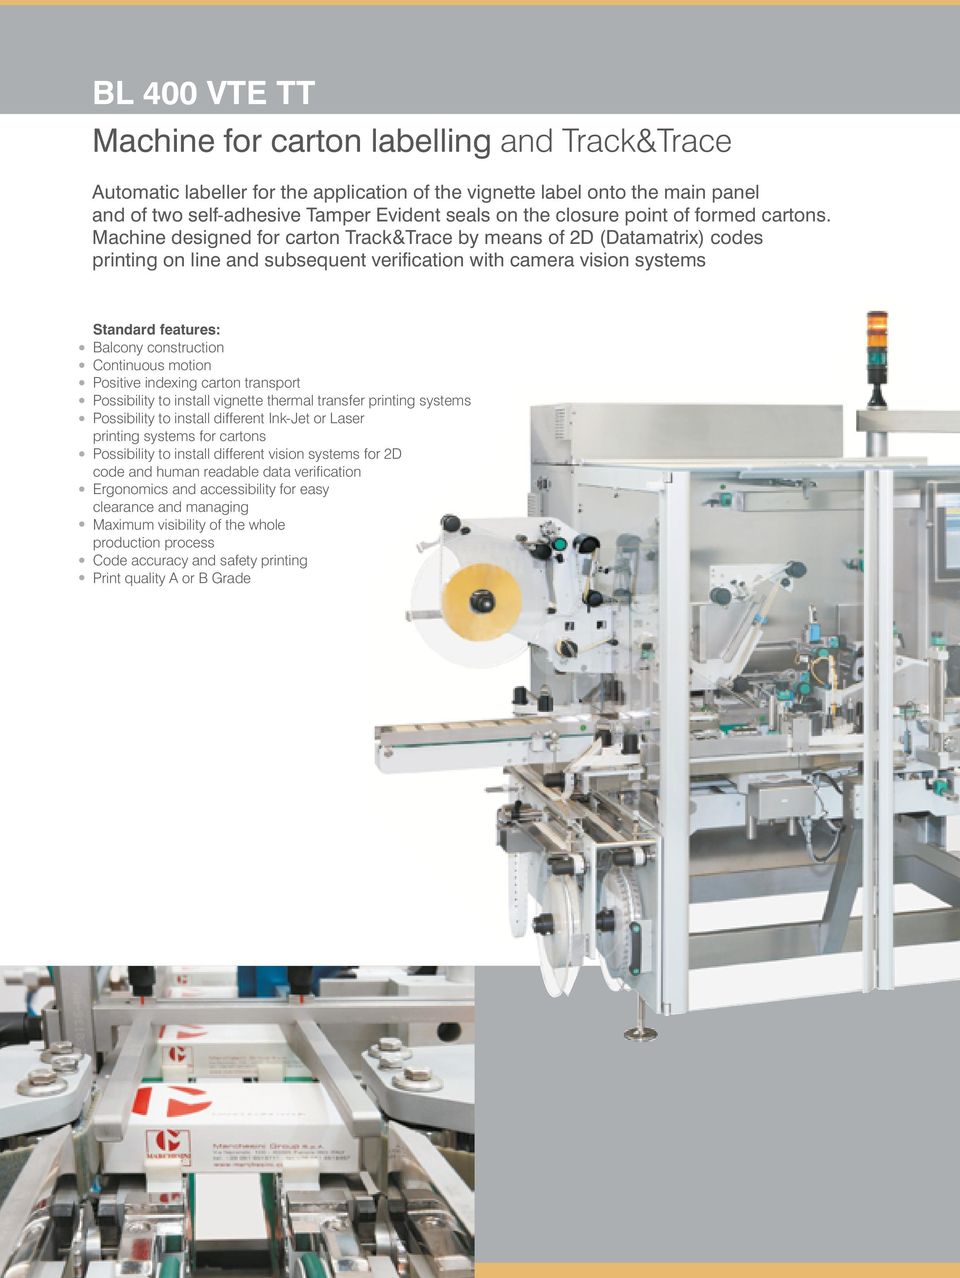 Machine designed for carton Track&Trace by means of 2D (Datamatrix) codes printing on line and subsequent verification with camera vision systems Standard features: Balcony construction Continuous